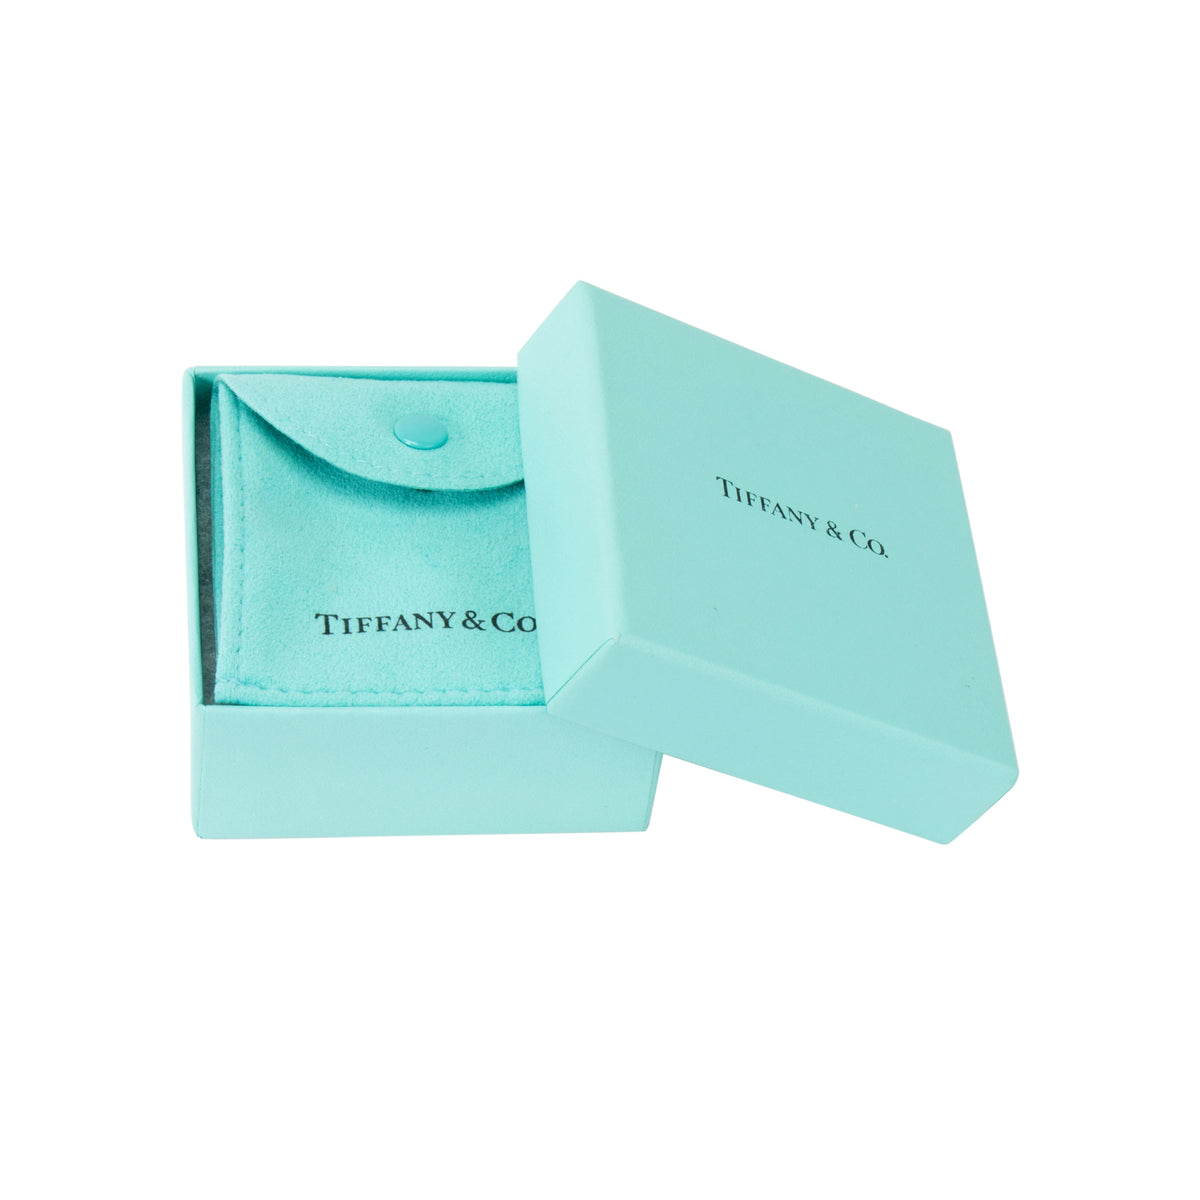 Tiffany & Co. Frank Gehry Cube Earring in Sterling Silver